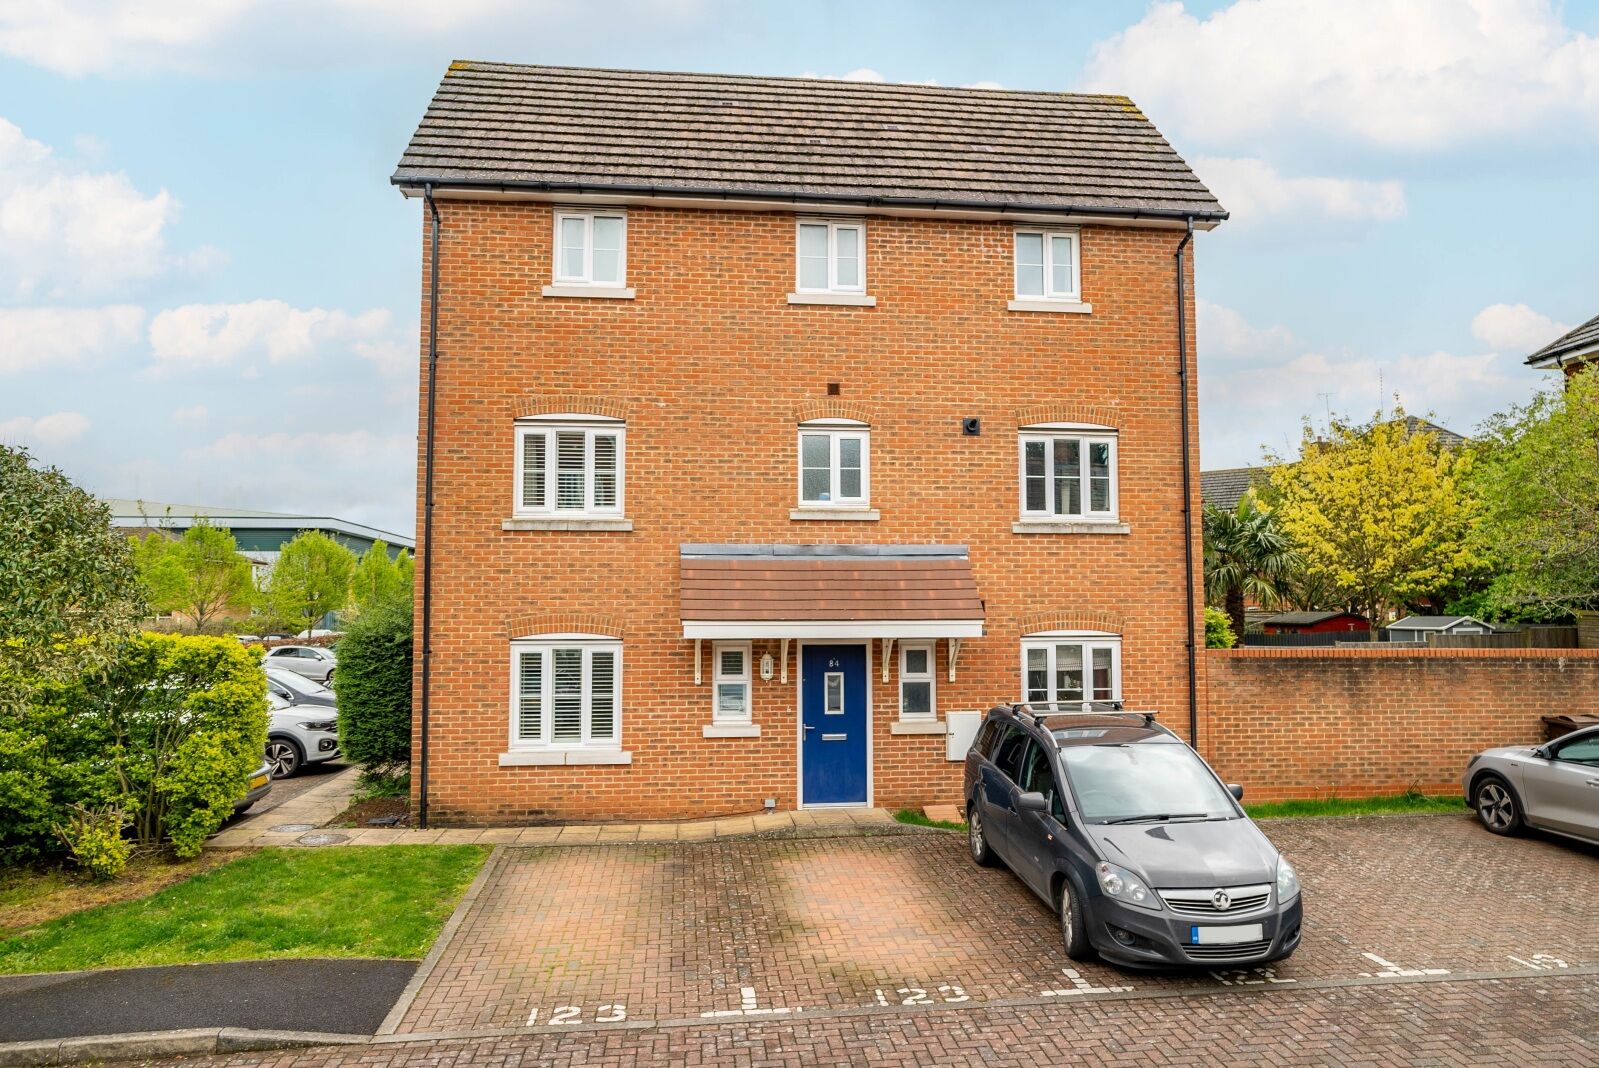 4 bedroom end terraced house for sale Centaurus Square, Frogmore, AL2, main image